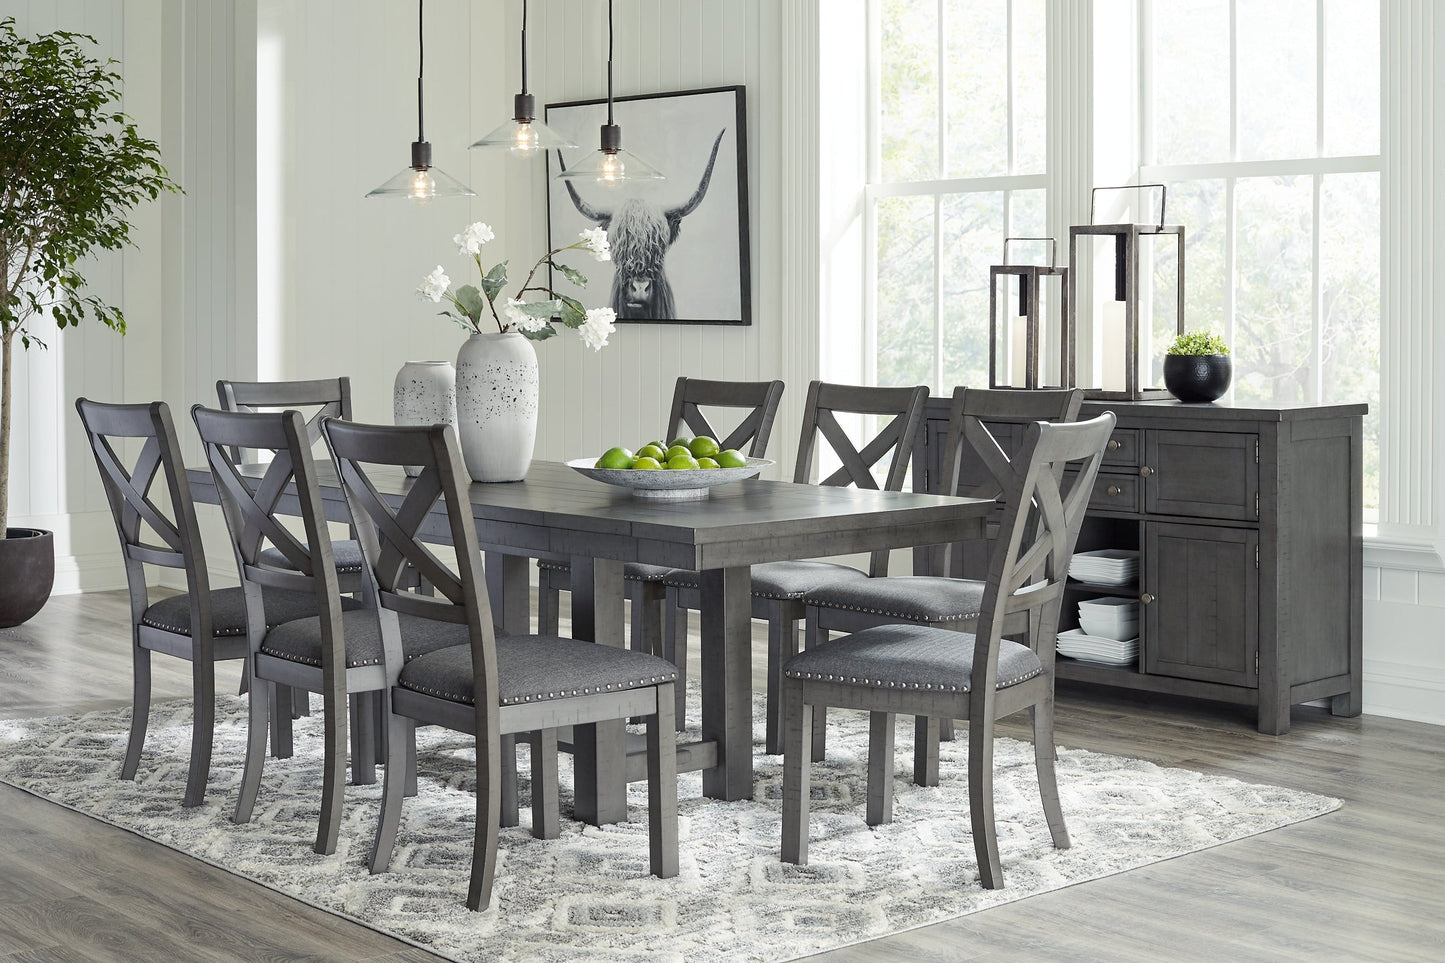 Myshanna Dining Table and 8 Chairs with Storage at Walker Mattress and Furniture Locations in Cedar Park and Belton TX.